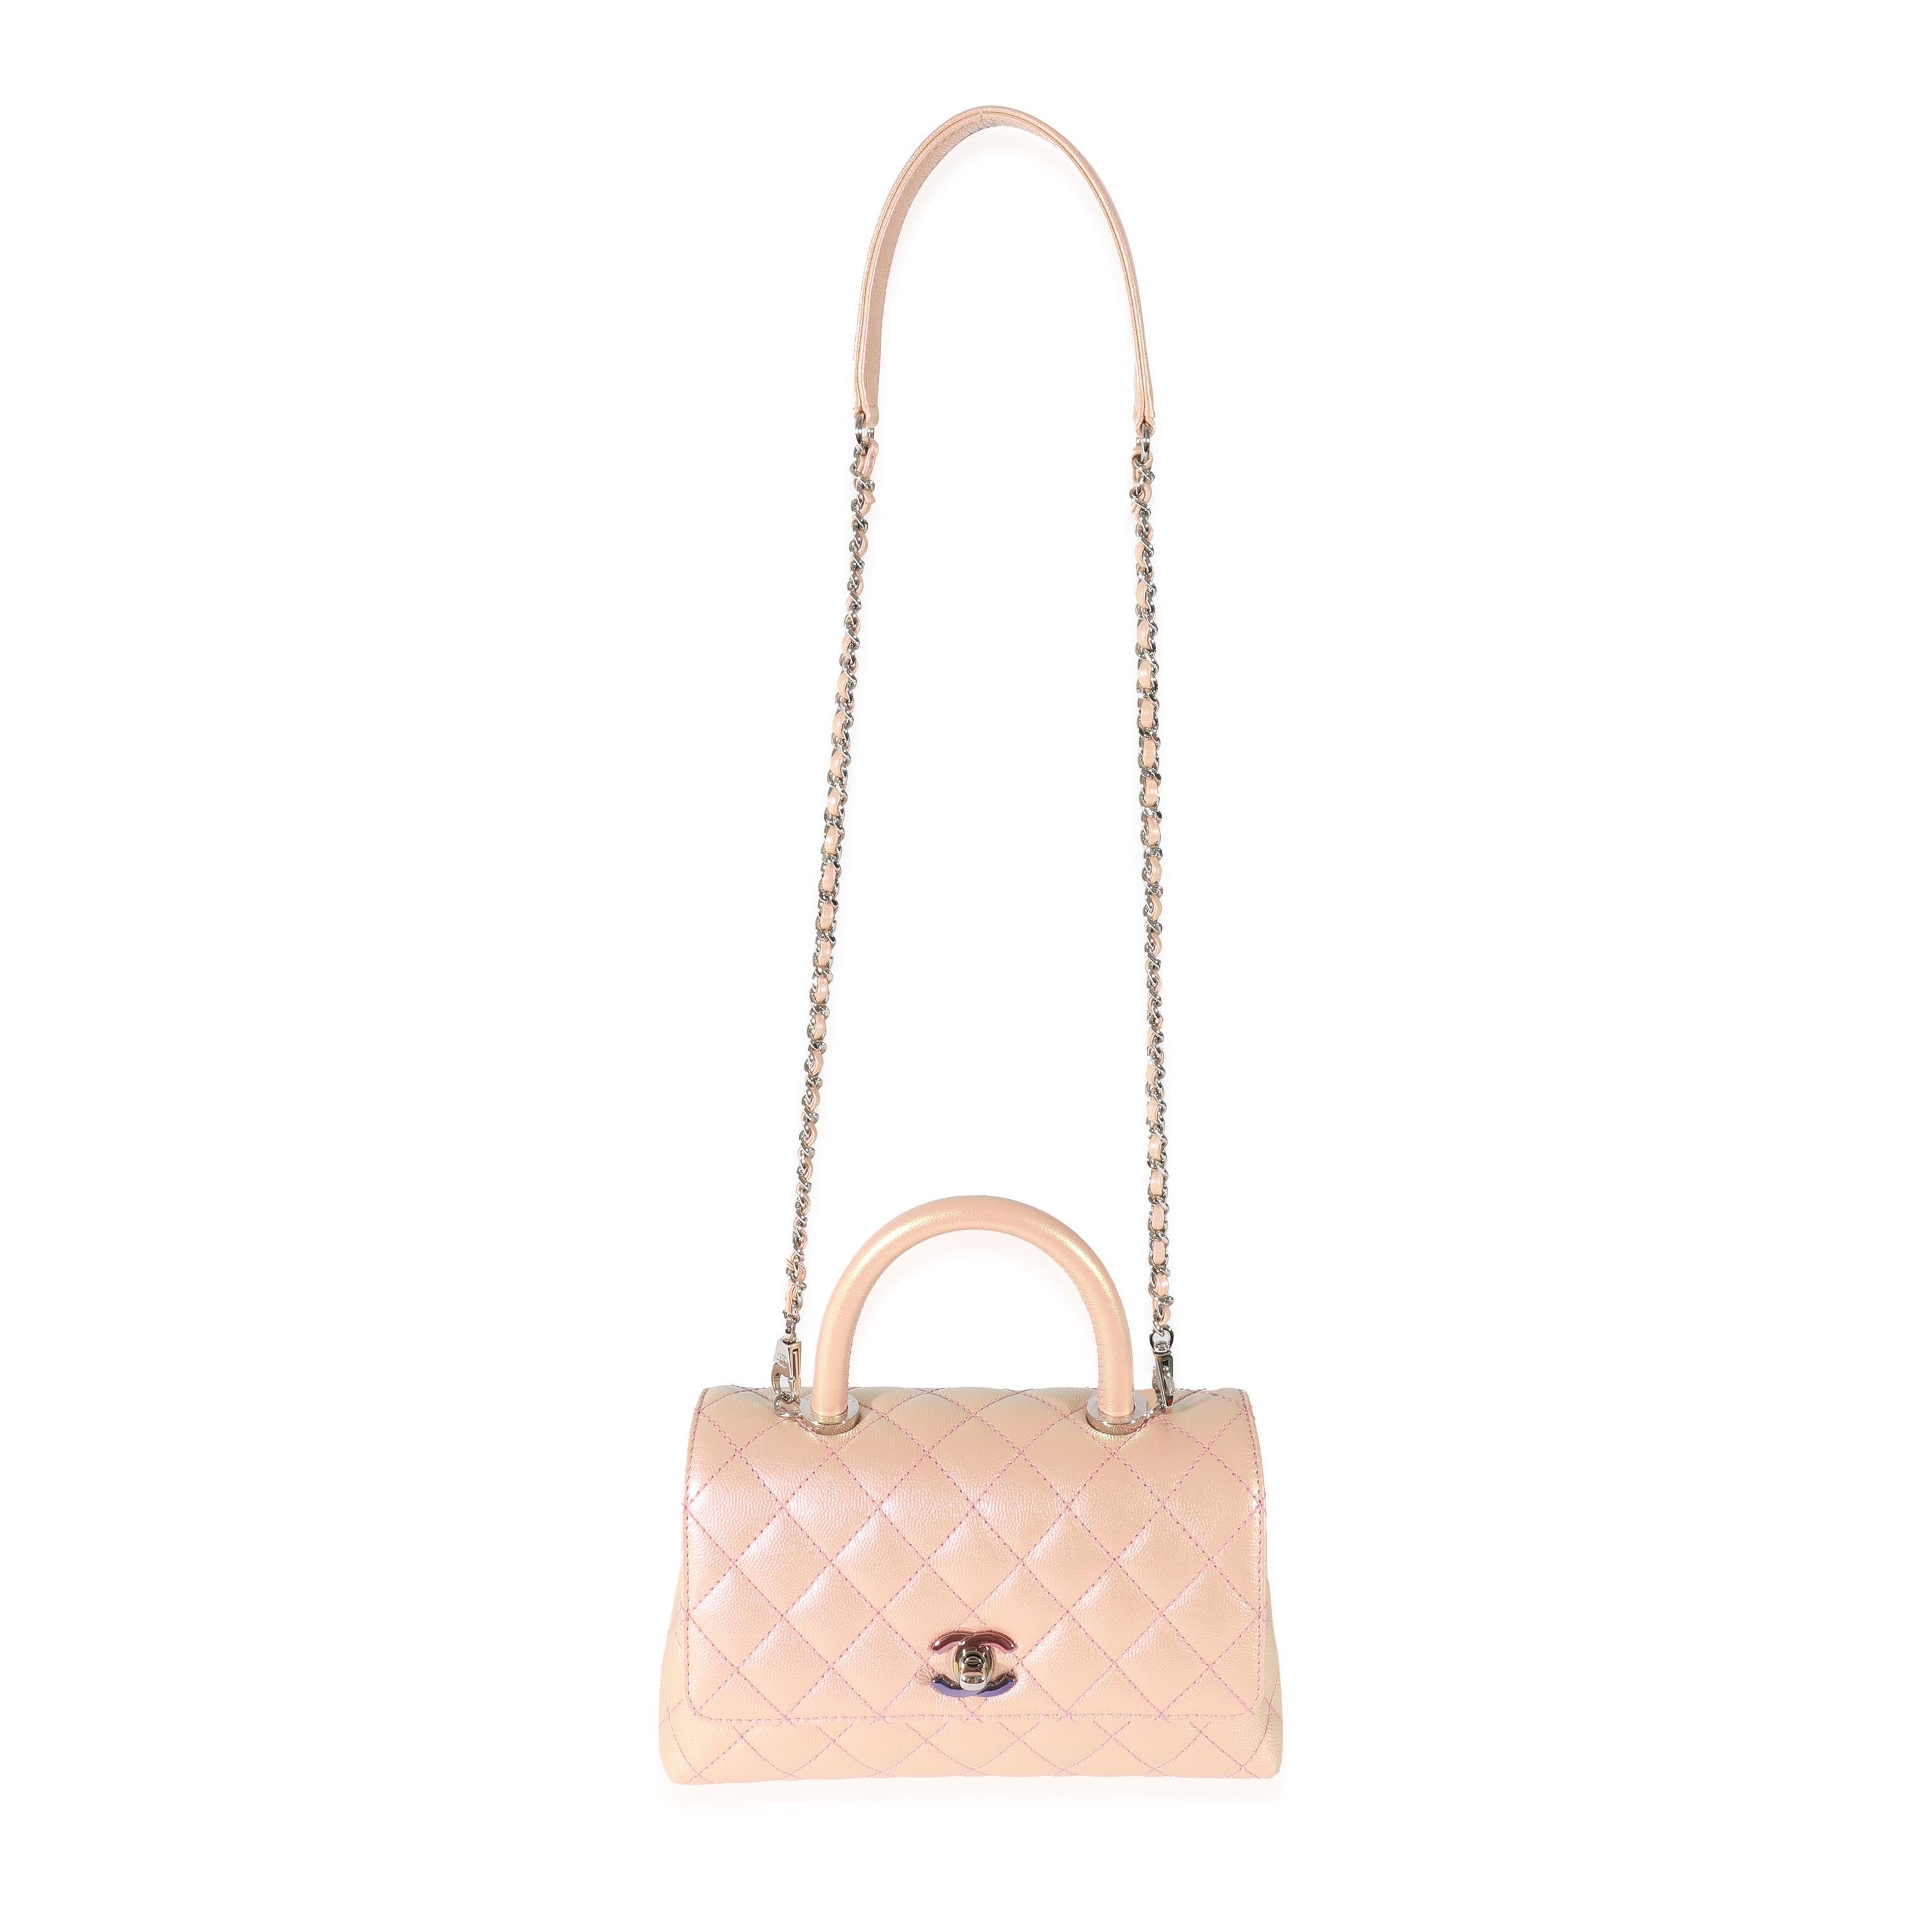 Listing Title: Chanel Pink Iridescent Quilted Caviar Coco Top Handle
 SKU: 128514
 Condition: Pre-owned 
 Handbag Condition: Very Good
 Condition Comments: Very Good Condition. Exterior corner scuffing. Faint scratching at hardware. Interior